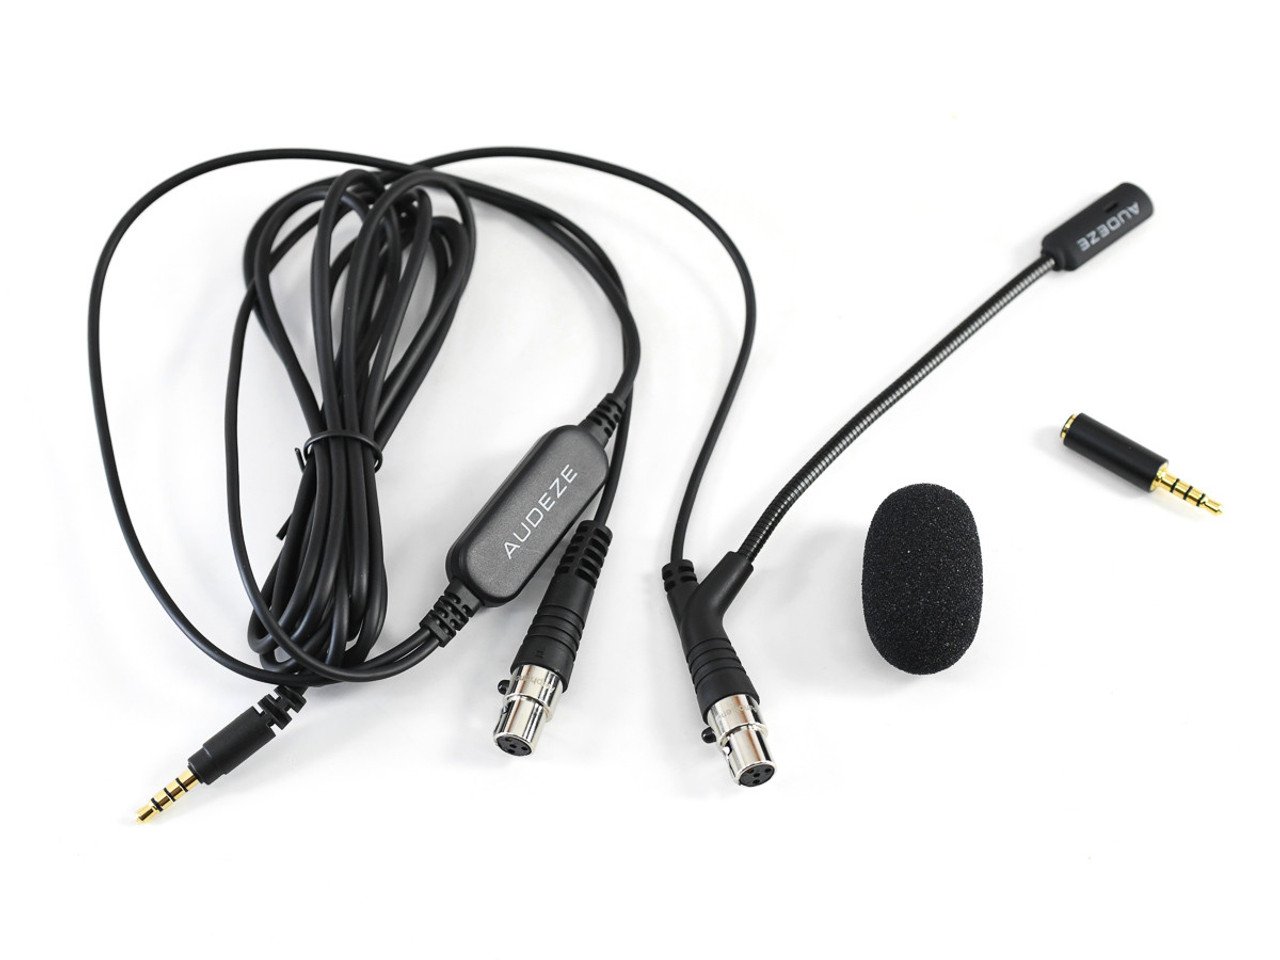 35mmTAudeze LCD Boom Microphone Cable